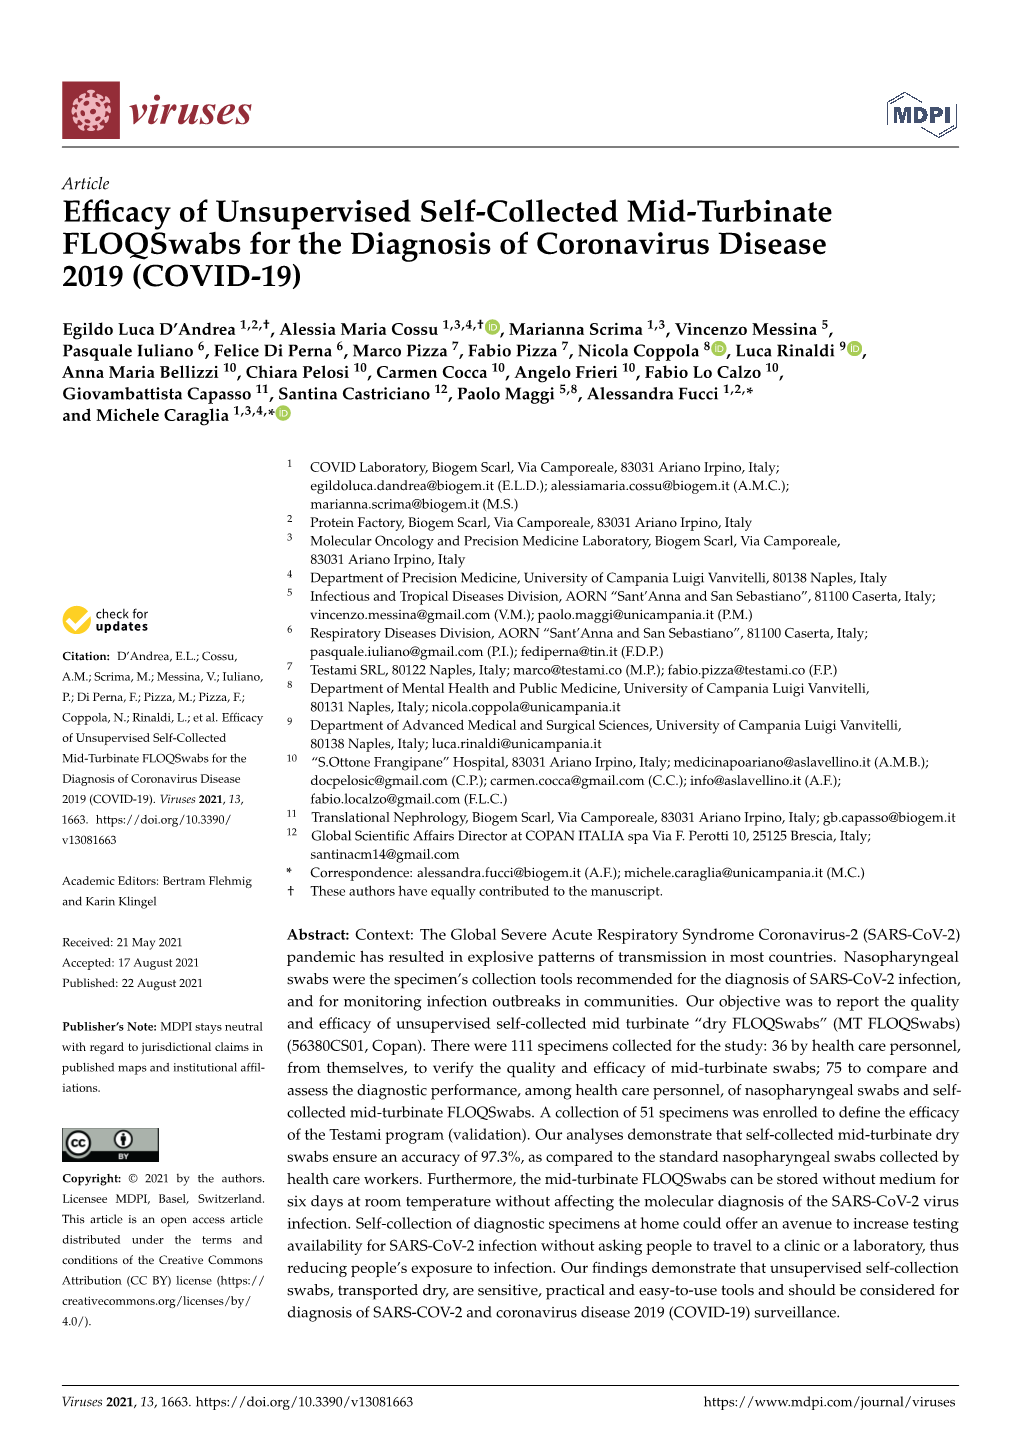 Efficacy of Unsupervised Self-Collected Mid-Turbinate Floqswabs for the Diagnosis of Coronavirus Disease 2019